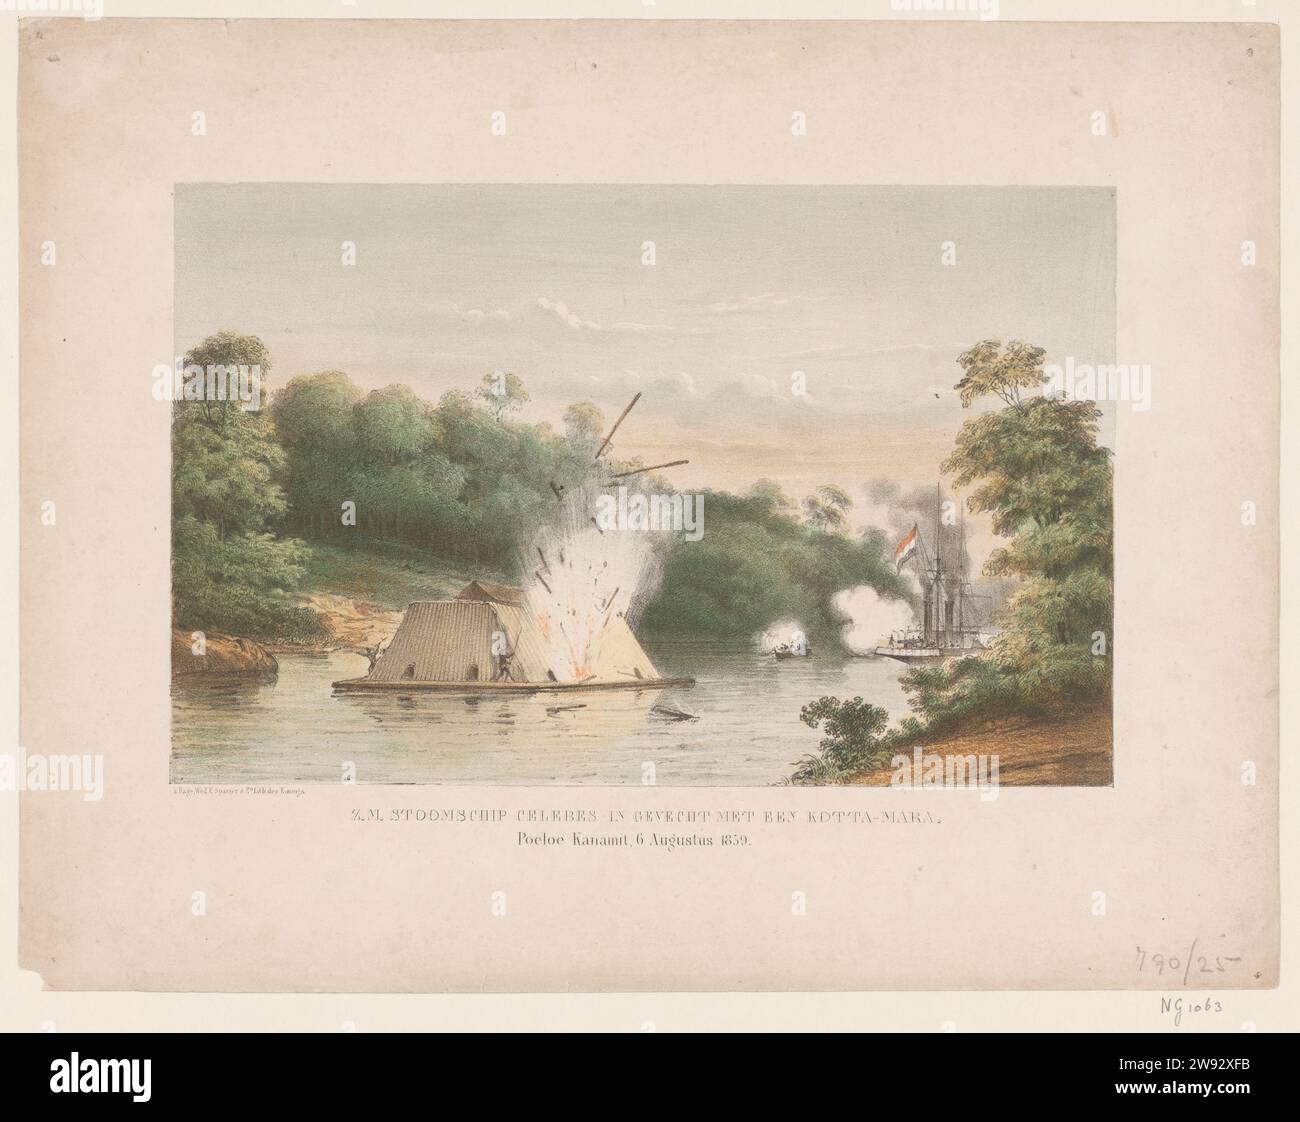 Z.M. Steamship Celebes in fight with a Kotta-Mara. Poeloe Kanamit, August 6, 1859, widow Elias Spanier & Zn, 1865 - 1867 print The Raderstoomschip Z.M. Celebes in fight with a so-called Kotta-Mara at Pulau Kanamit on Borneo during the Bandjarmasin war, August 6, 1859. River landscape with a Kotta-Mara on the water with two Borneose men on board. The ship is hit by the shelling by the steamship Celebes that the Dutch flag carries and a sloop, of which smoke clouds (from guns) take off. The Hague paper  battle (+ naval force). steamship, motorship Borneo Stock Photo